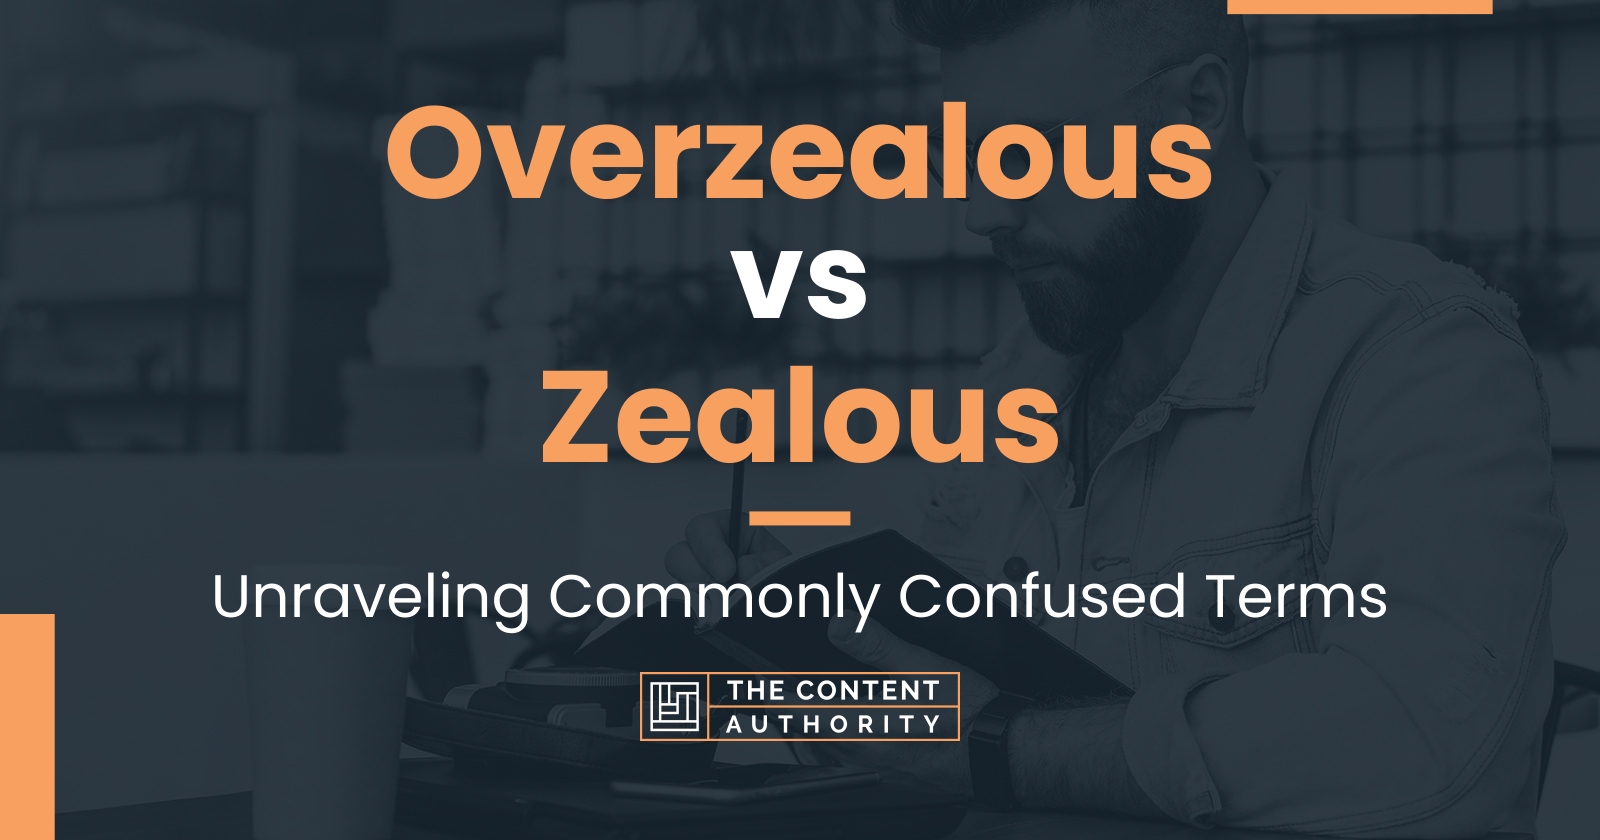 Overzealous vs Zealous: Unraveling Commonly Confused Terms